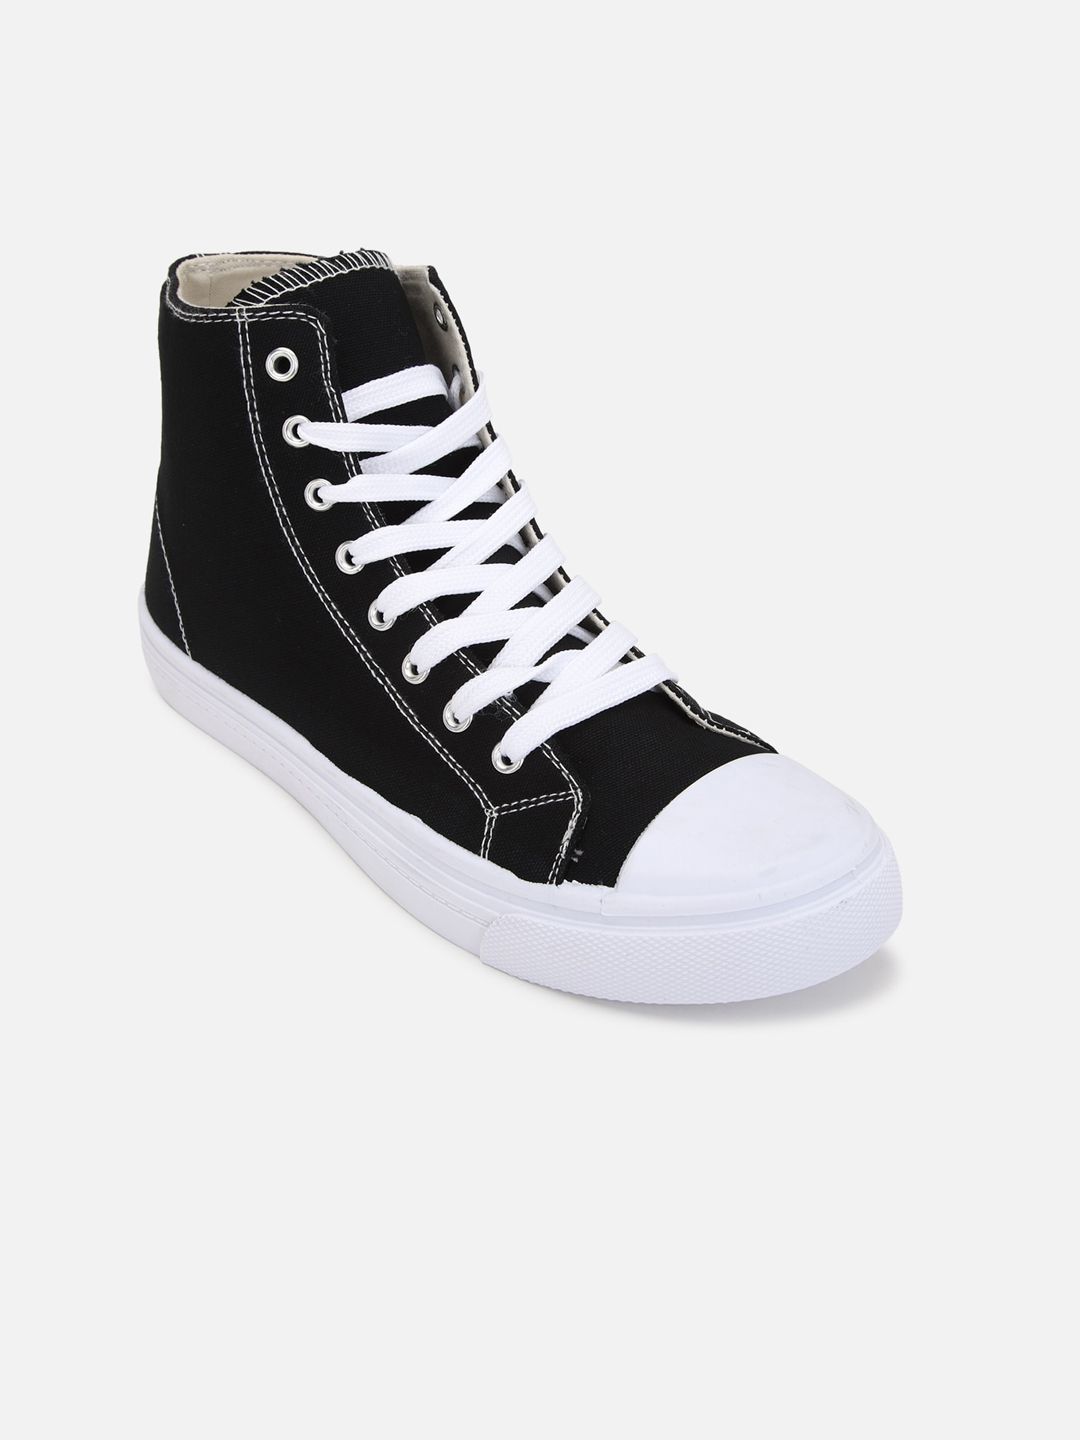 FOREVER 21 Women Colourblocked High-Top Sneakers Price in India